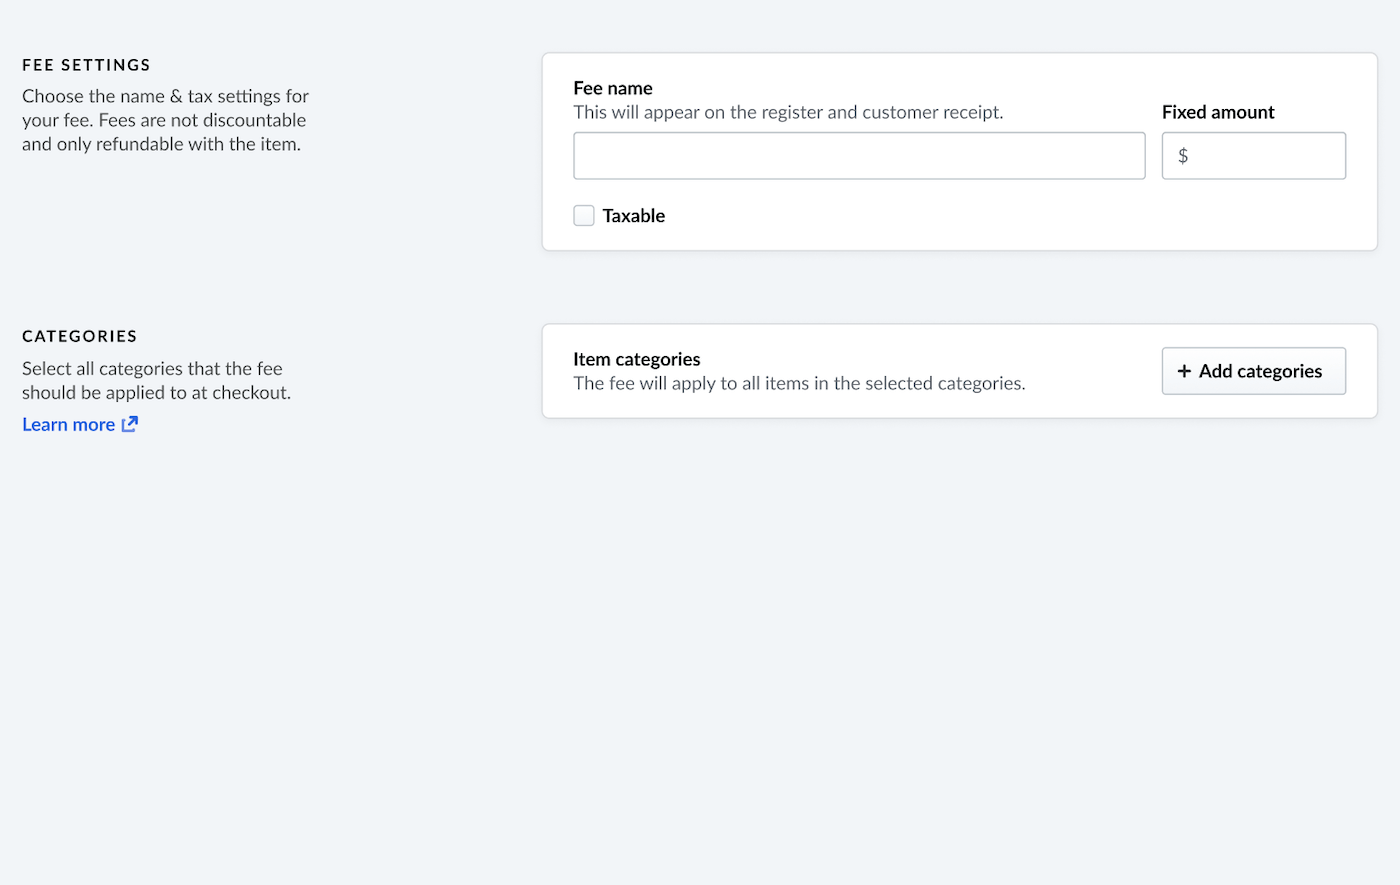 Fee name and Fixed amount fields on the New fee page